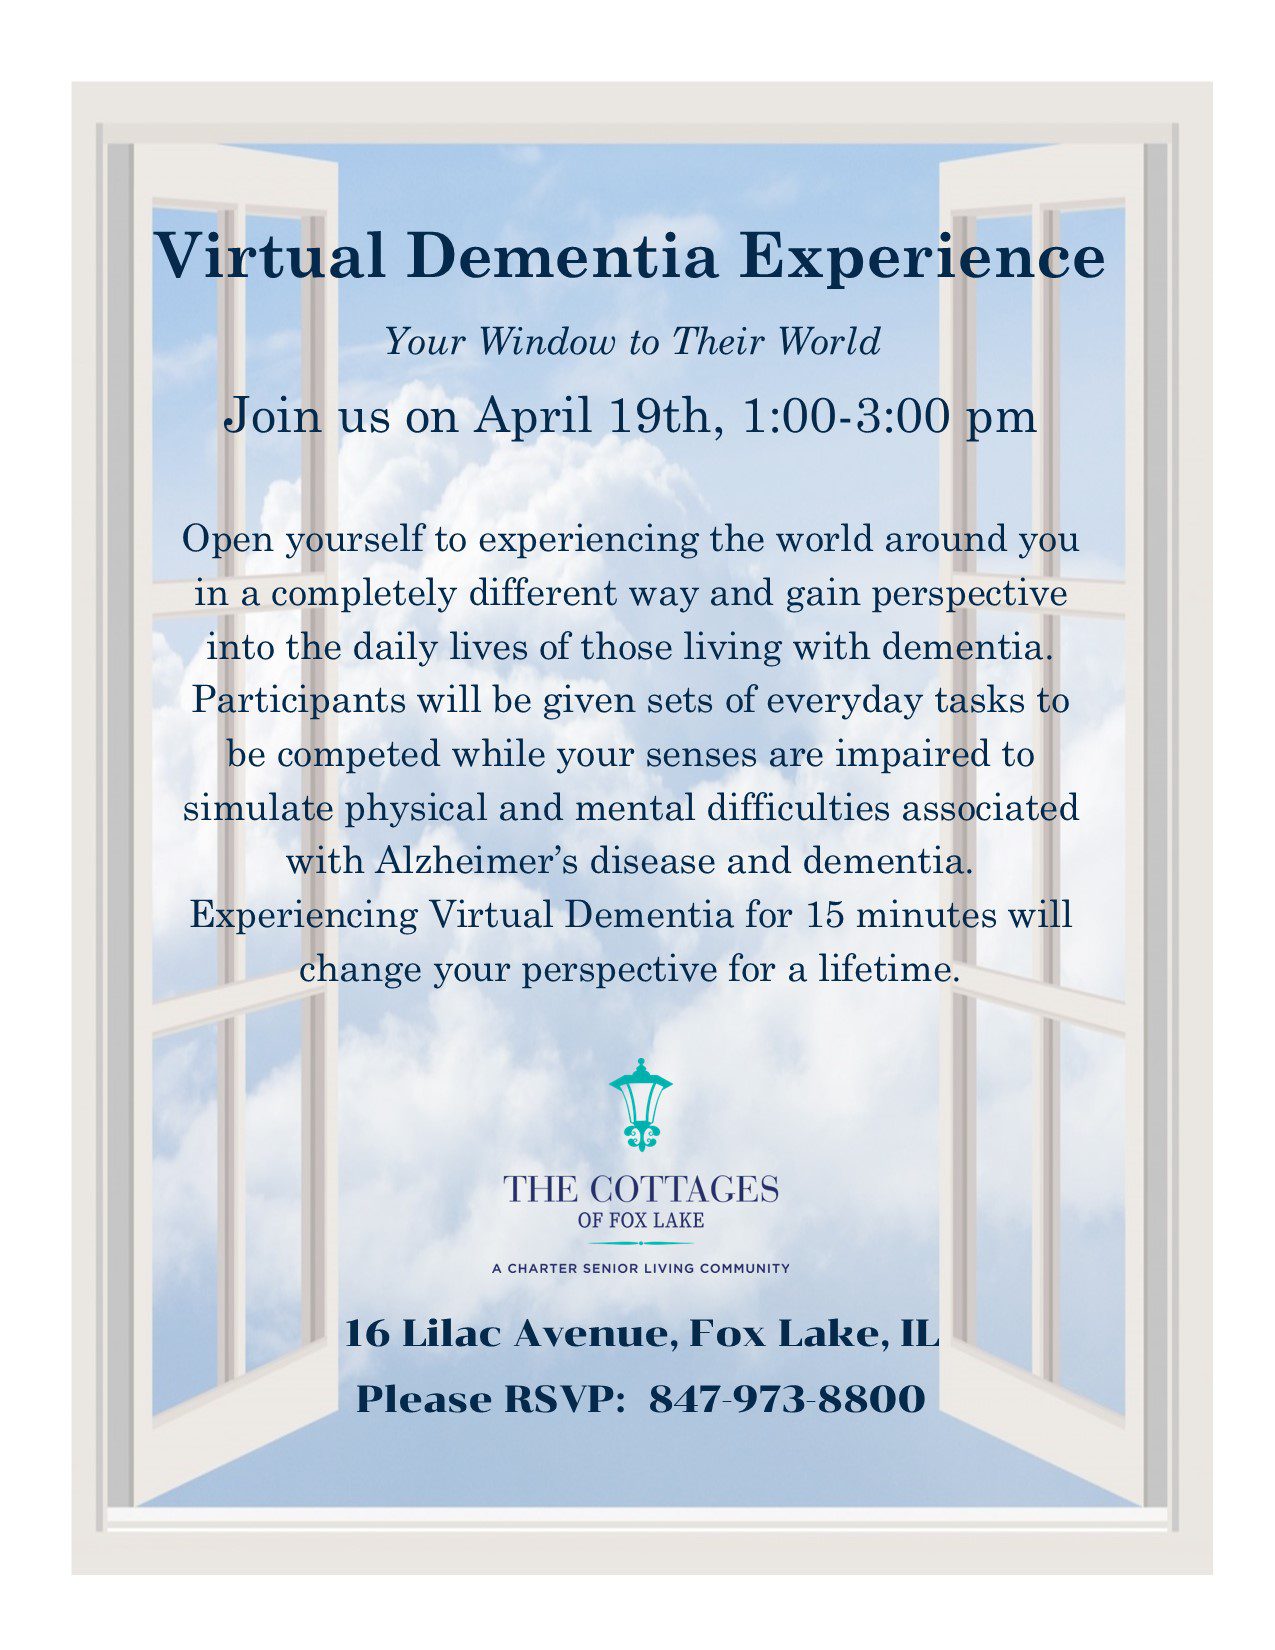 Cottages of Fox Lake - Assisted Living and Memory Care - Family - Virtual Dementia Experience - April 2023